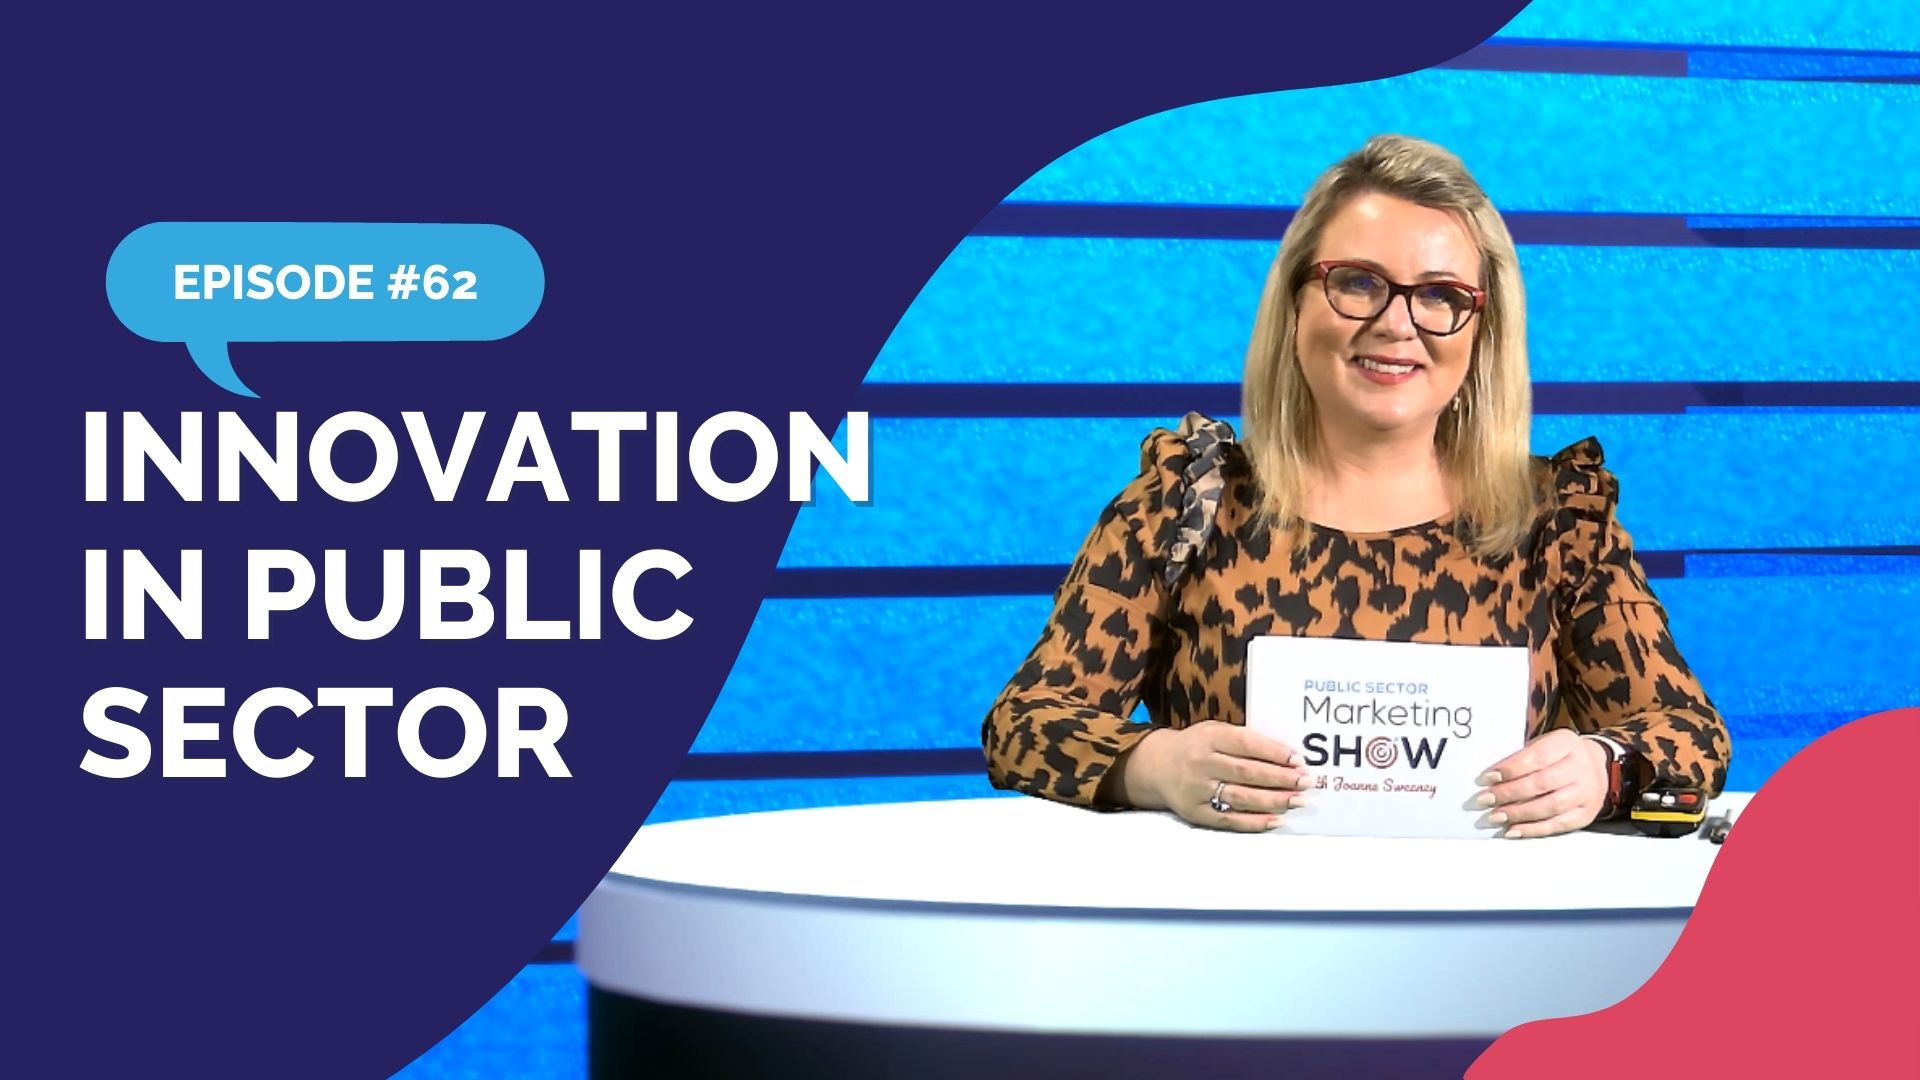 Episode 62 - Innovation in Public Sector